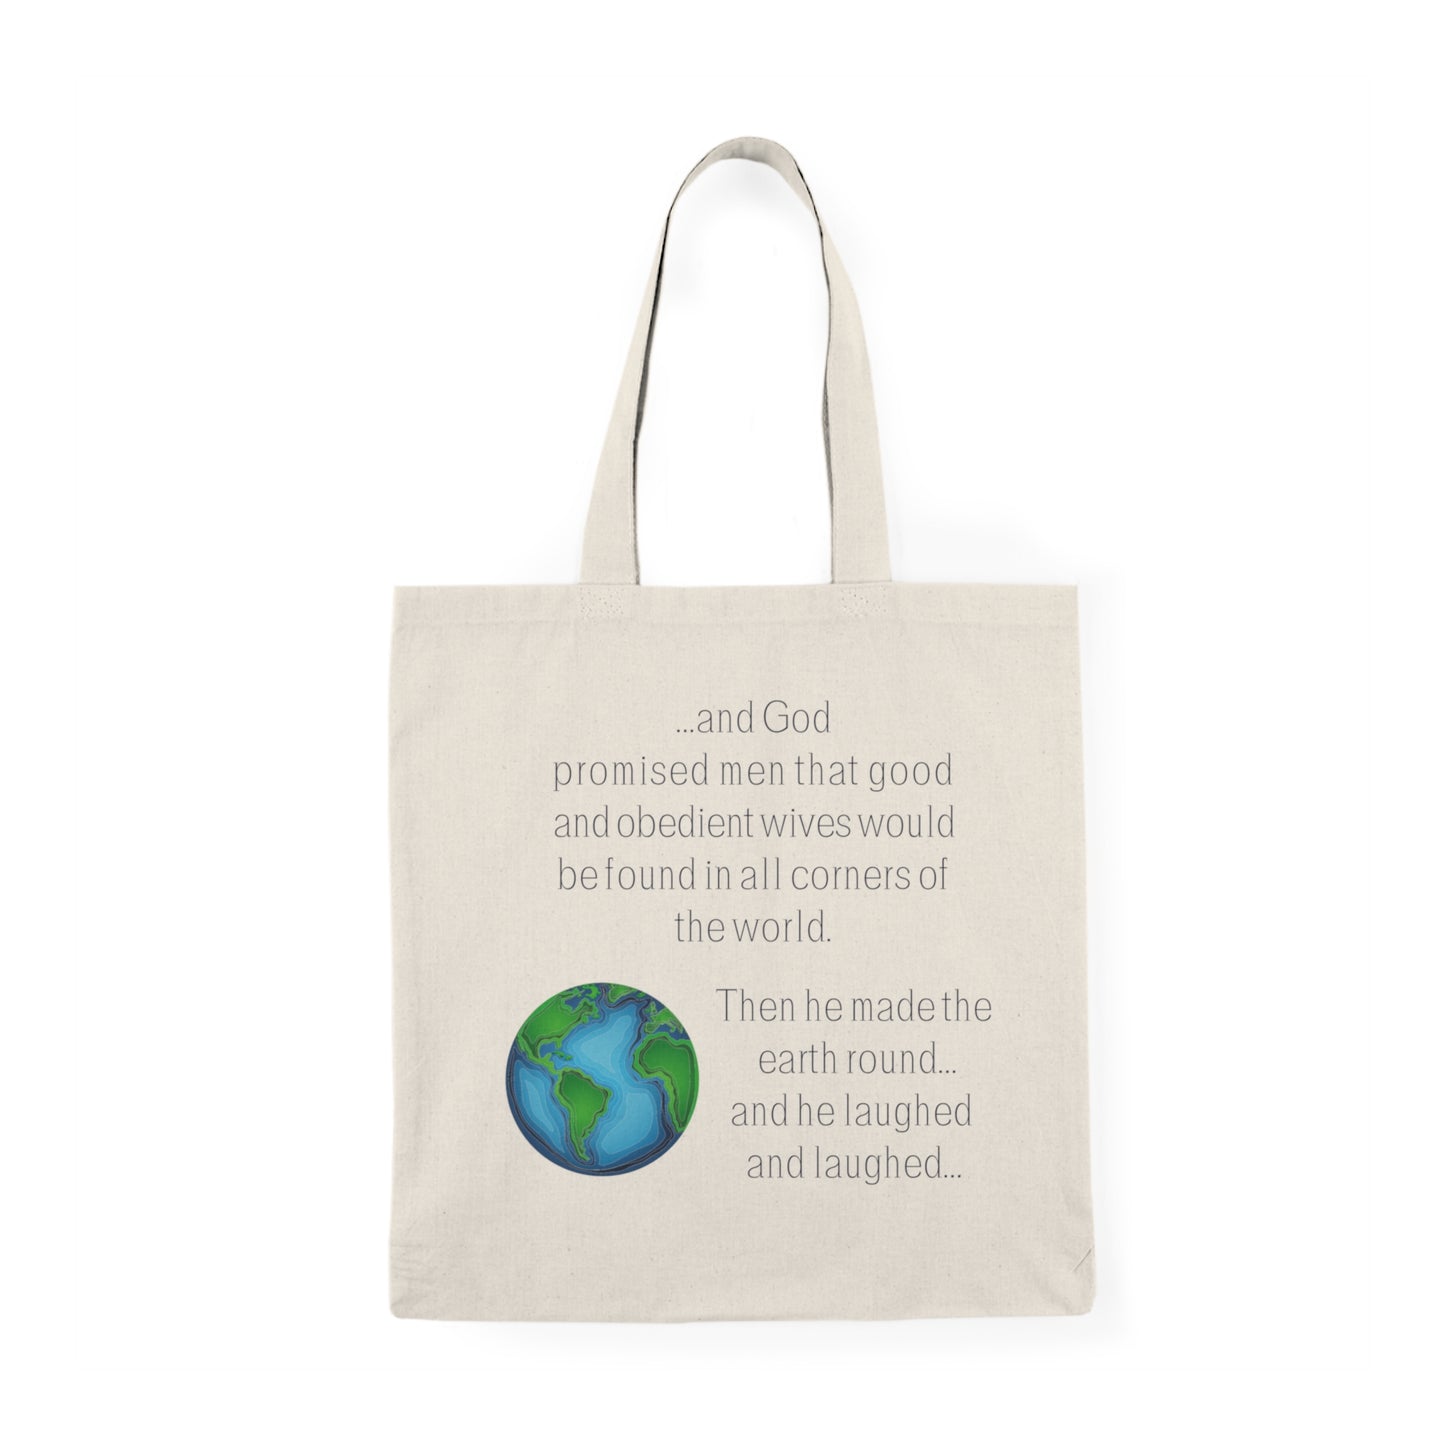 Good and Obedient Wives Tote Bag